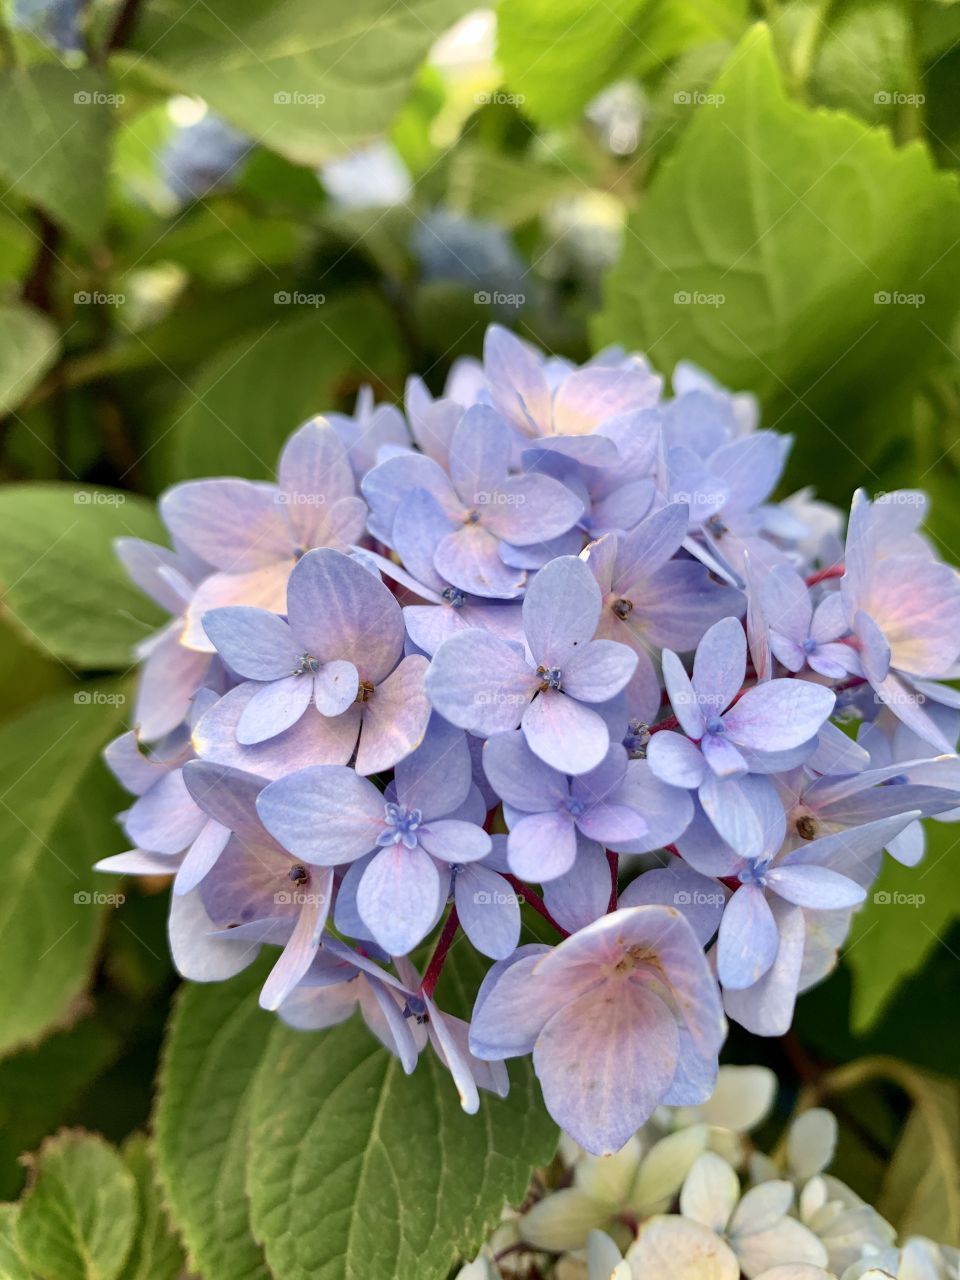 Hydrangea flower head and leaves